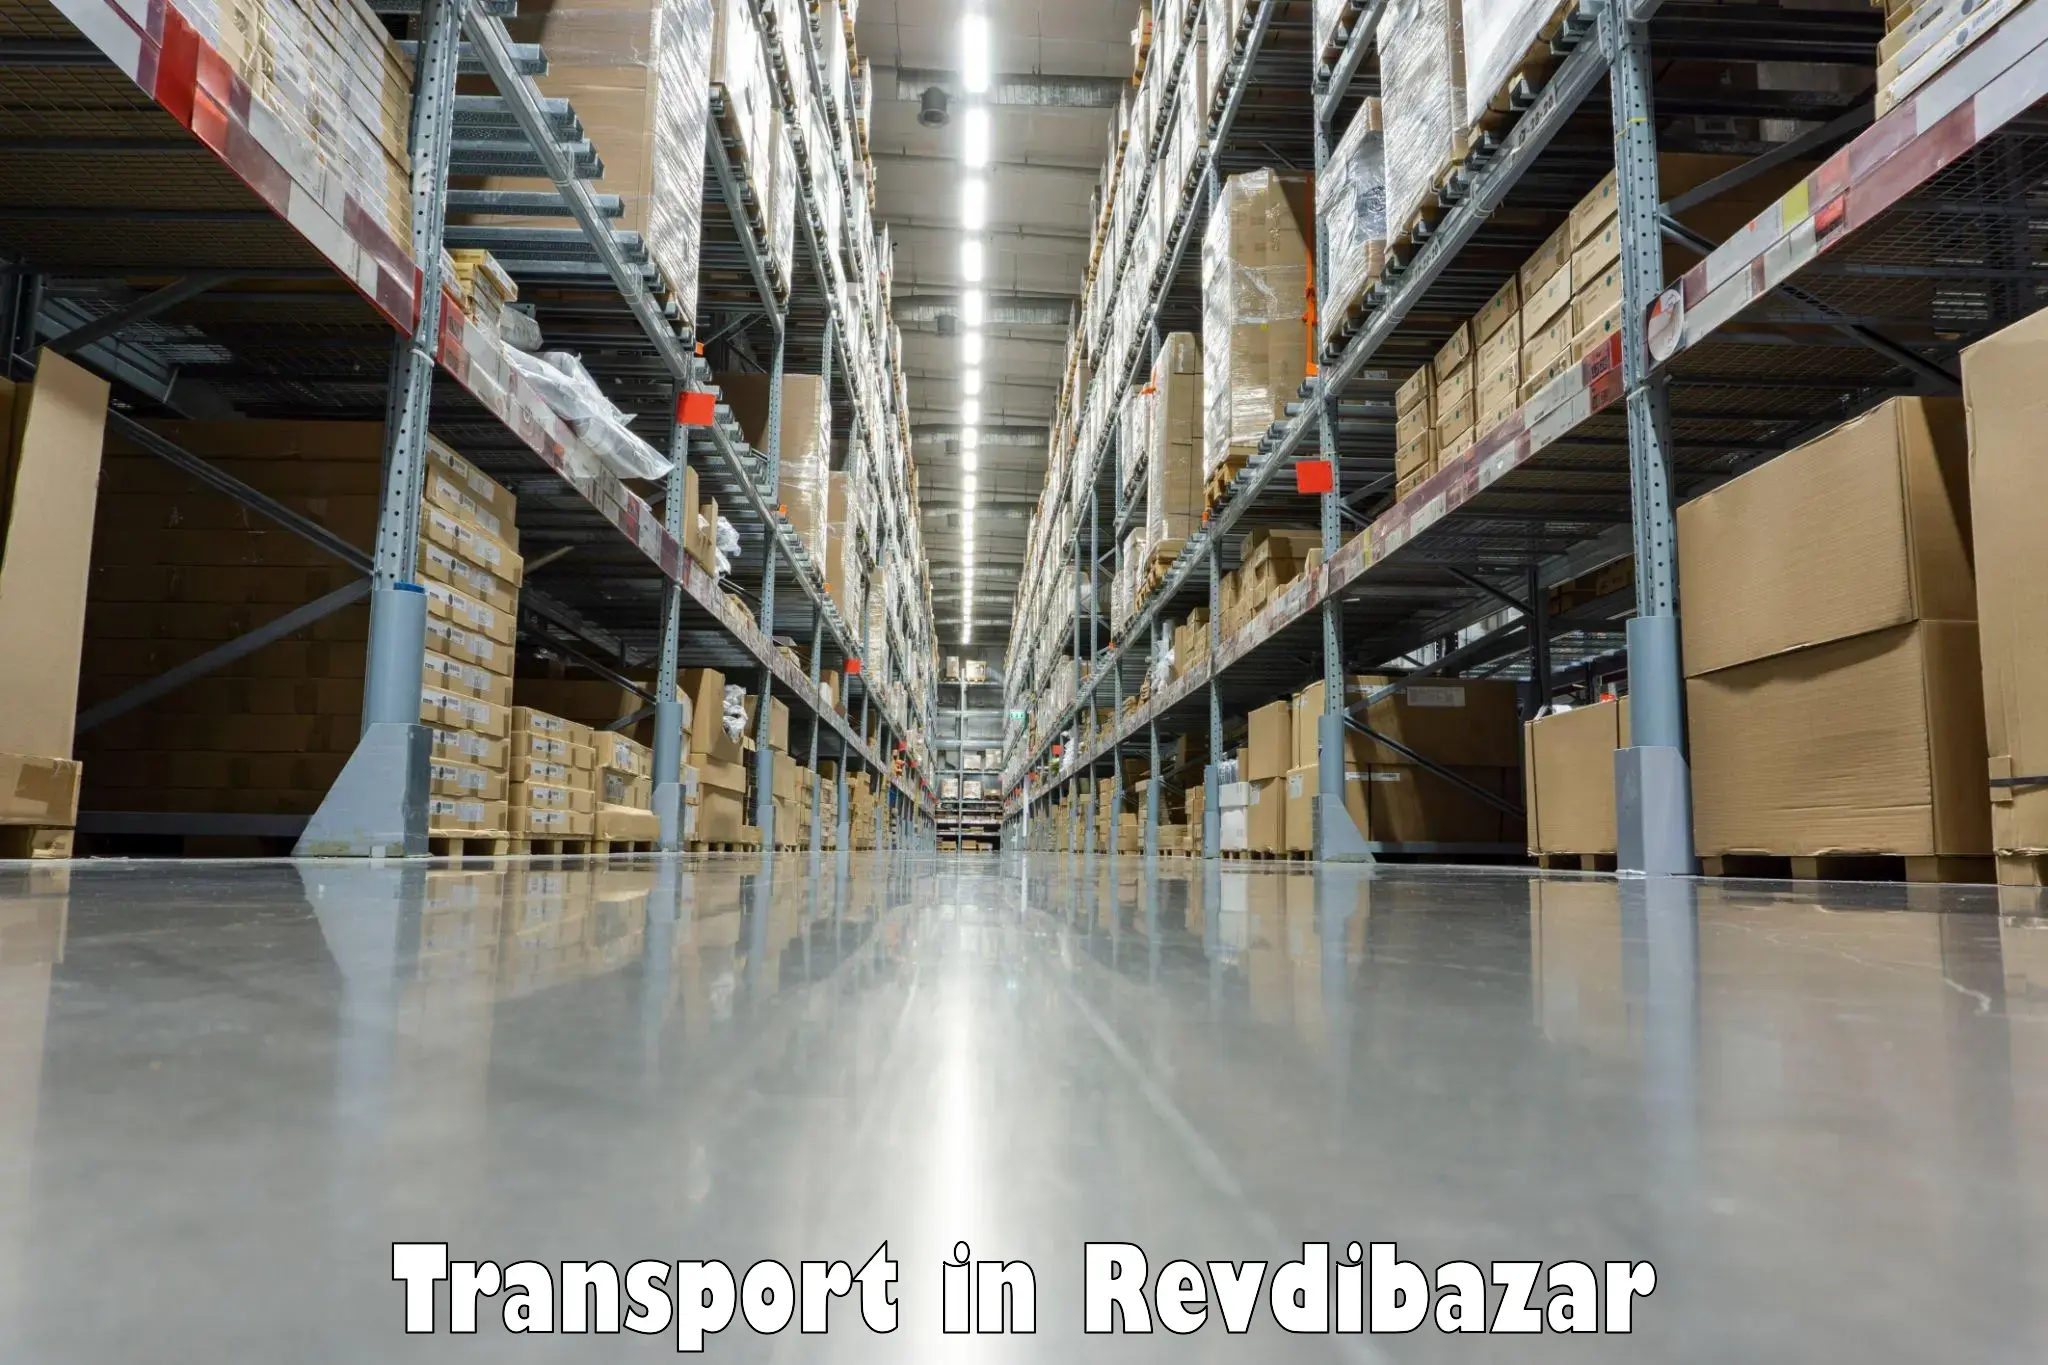 Container transport service in Revdibazar